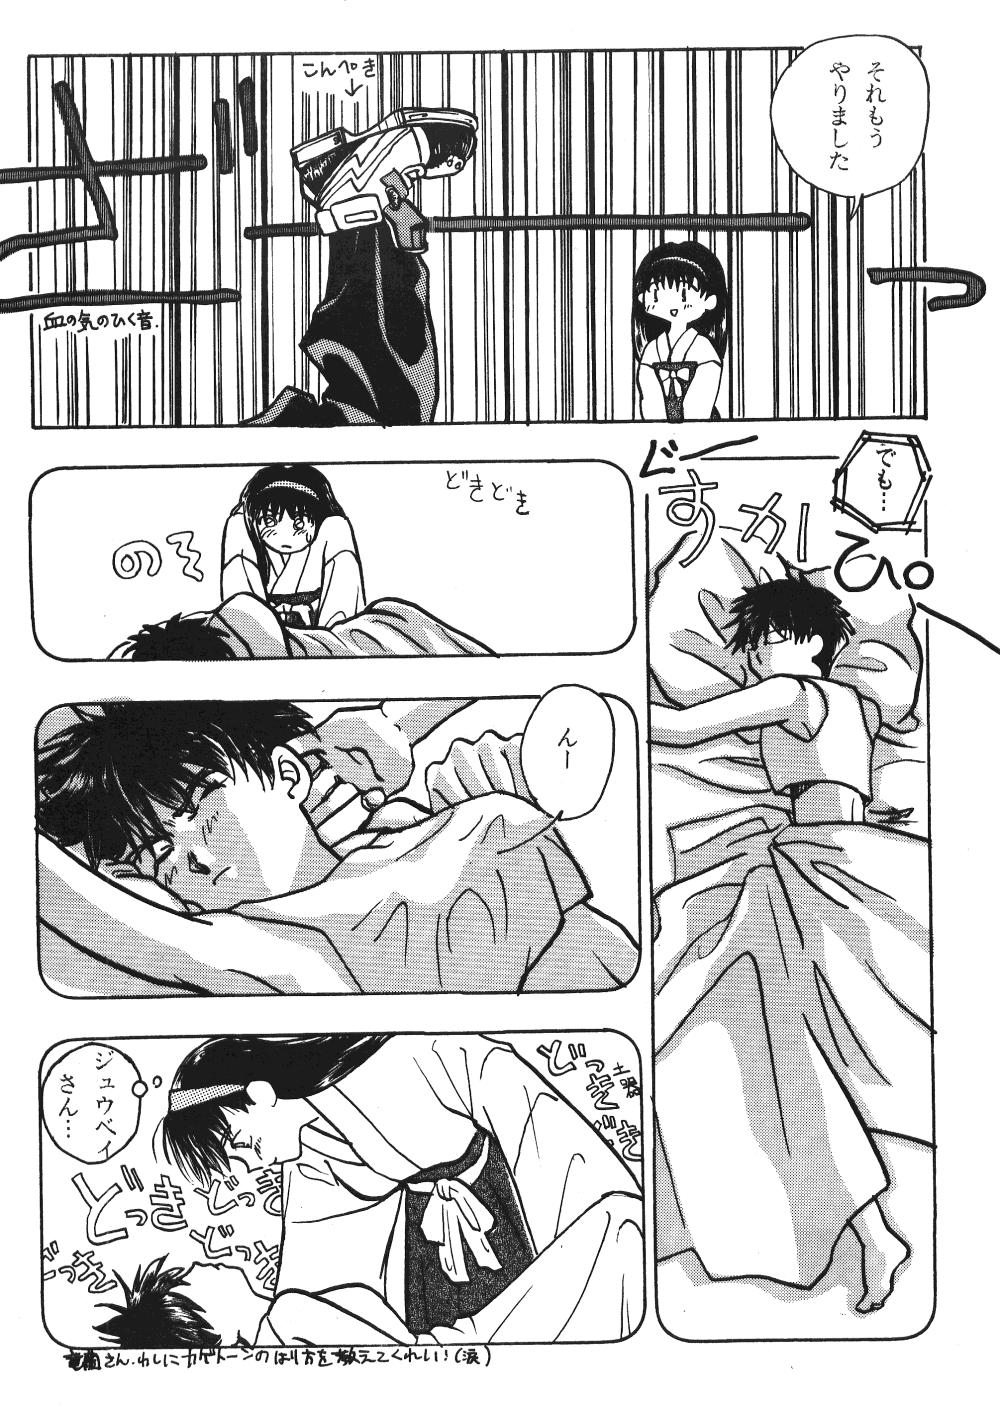 Bear Seinen Sunday - Street fighter Ranma 12 Ghost sweeper mikami Best Blow Job Ever - Page 11